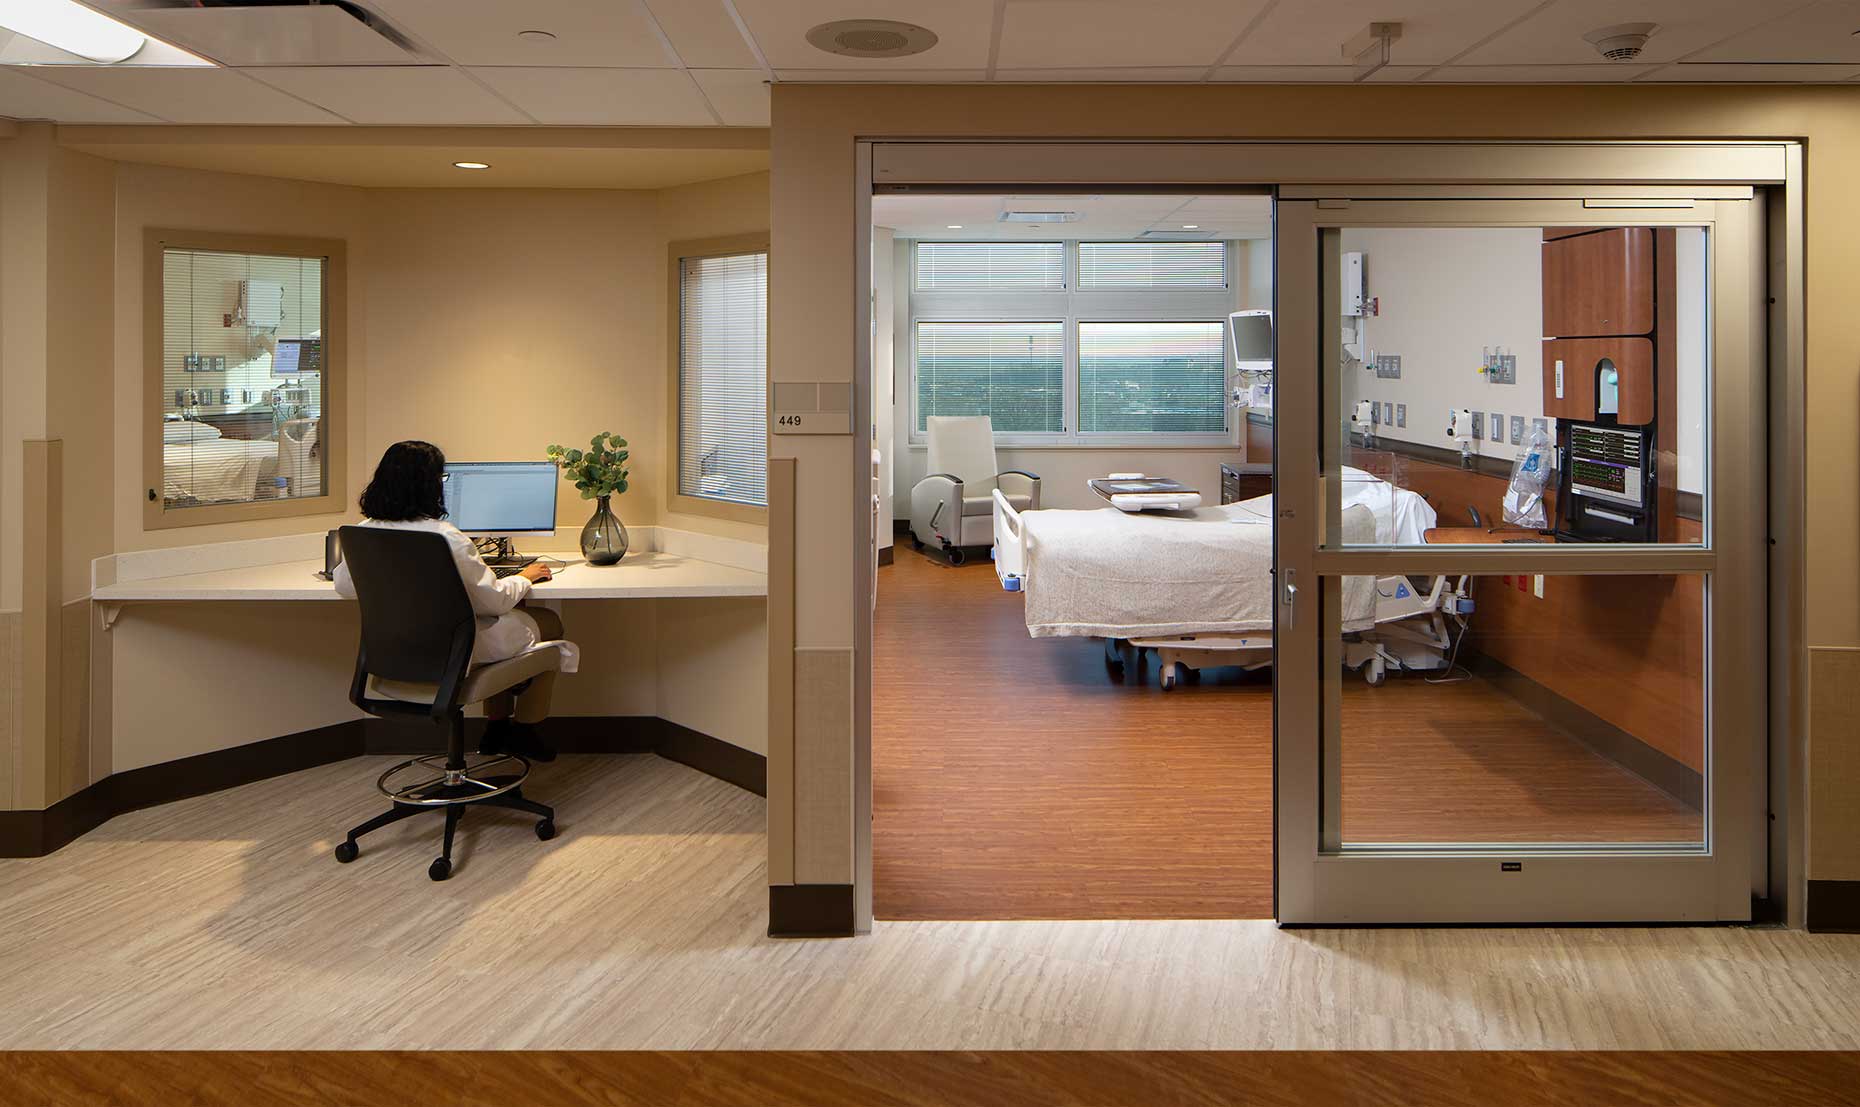 Centerpoint Medical Center | Patient Room<br>Gould Turner Group / JE Dunn Construction